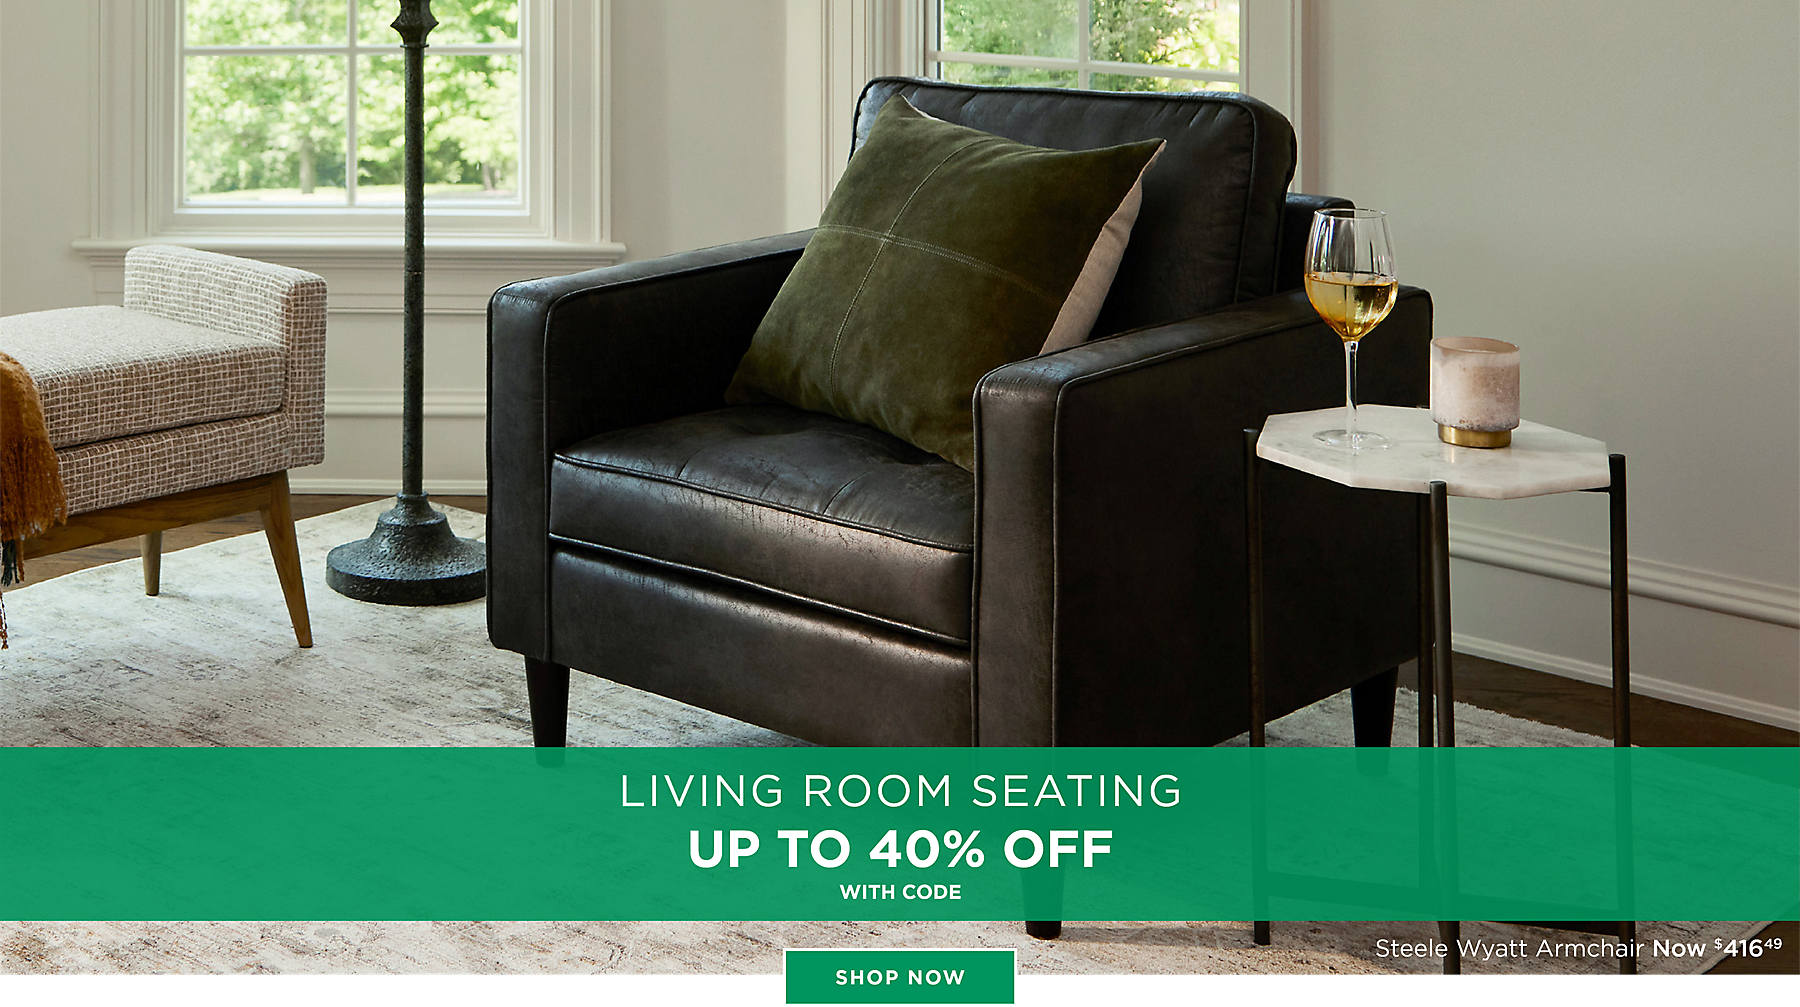 Living Room Seating Up to 40% Off with code Shop Now Steele Wyatt Armchair Now $416.49